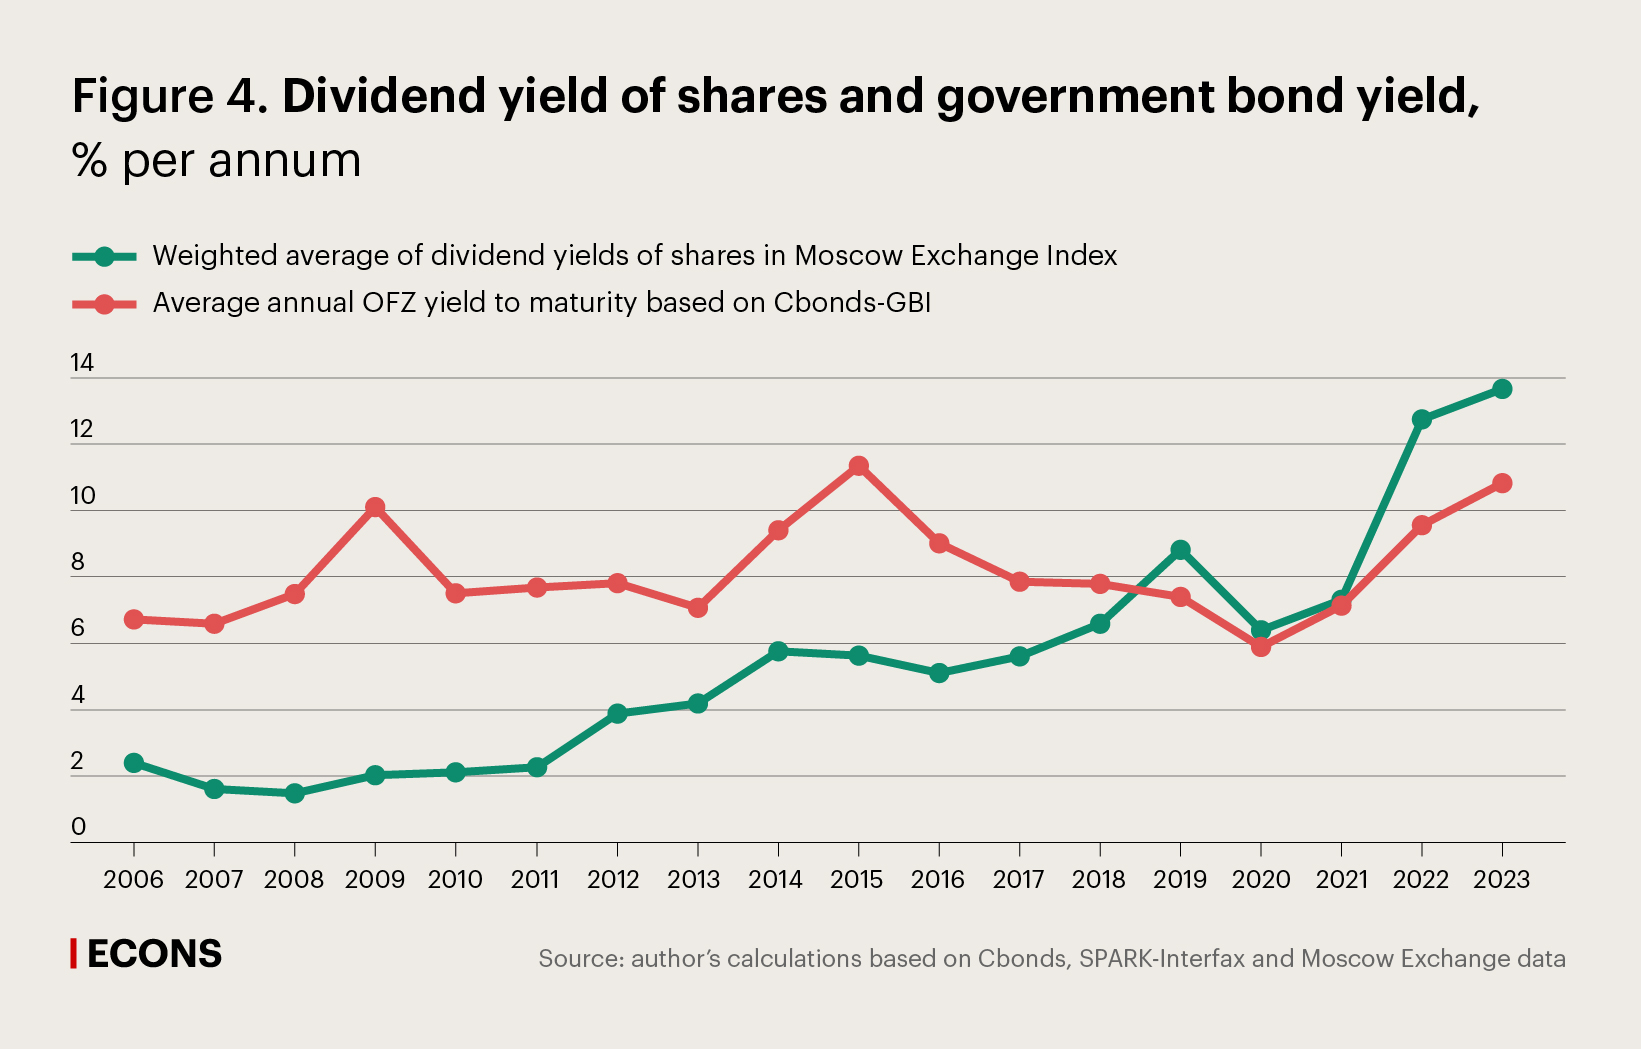 Dividend yield of shares and government bond yield, % per annum